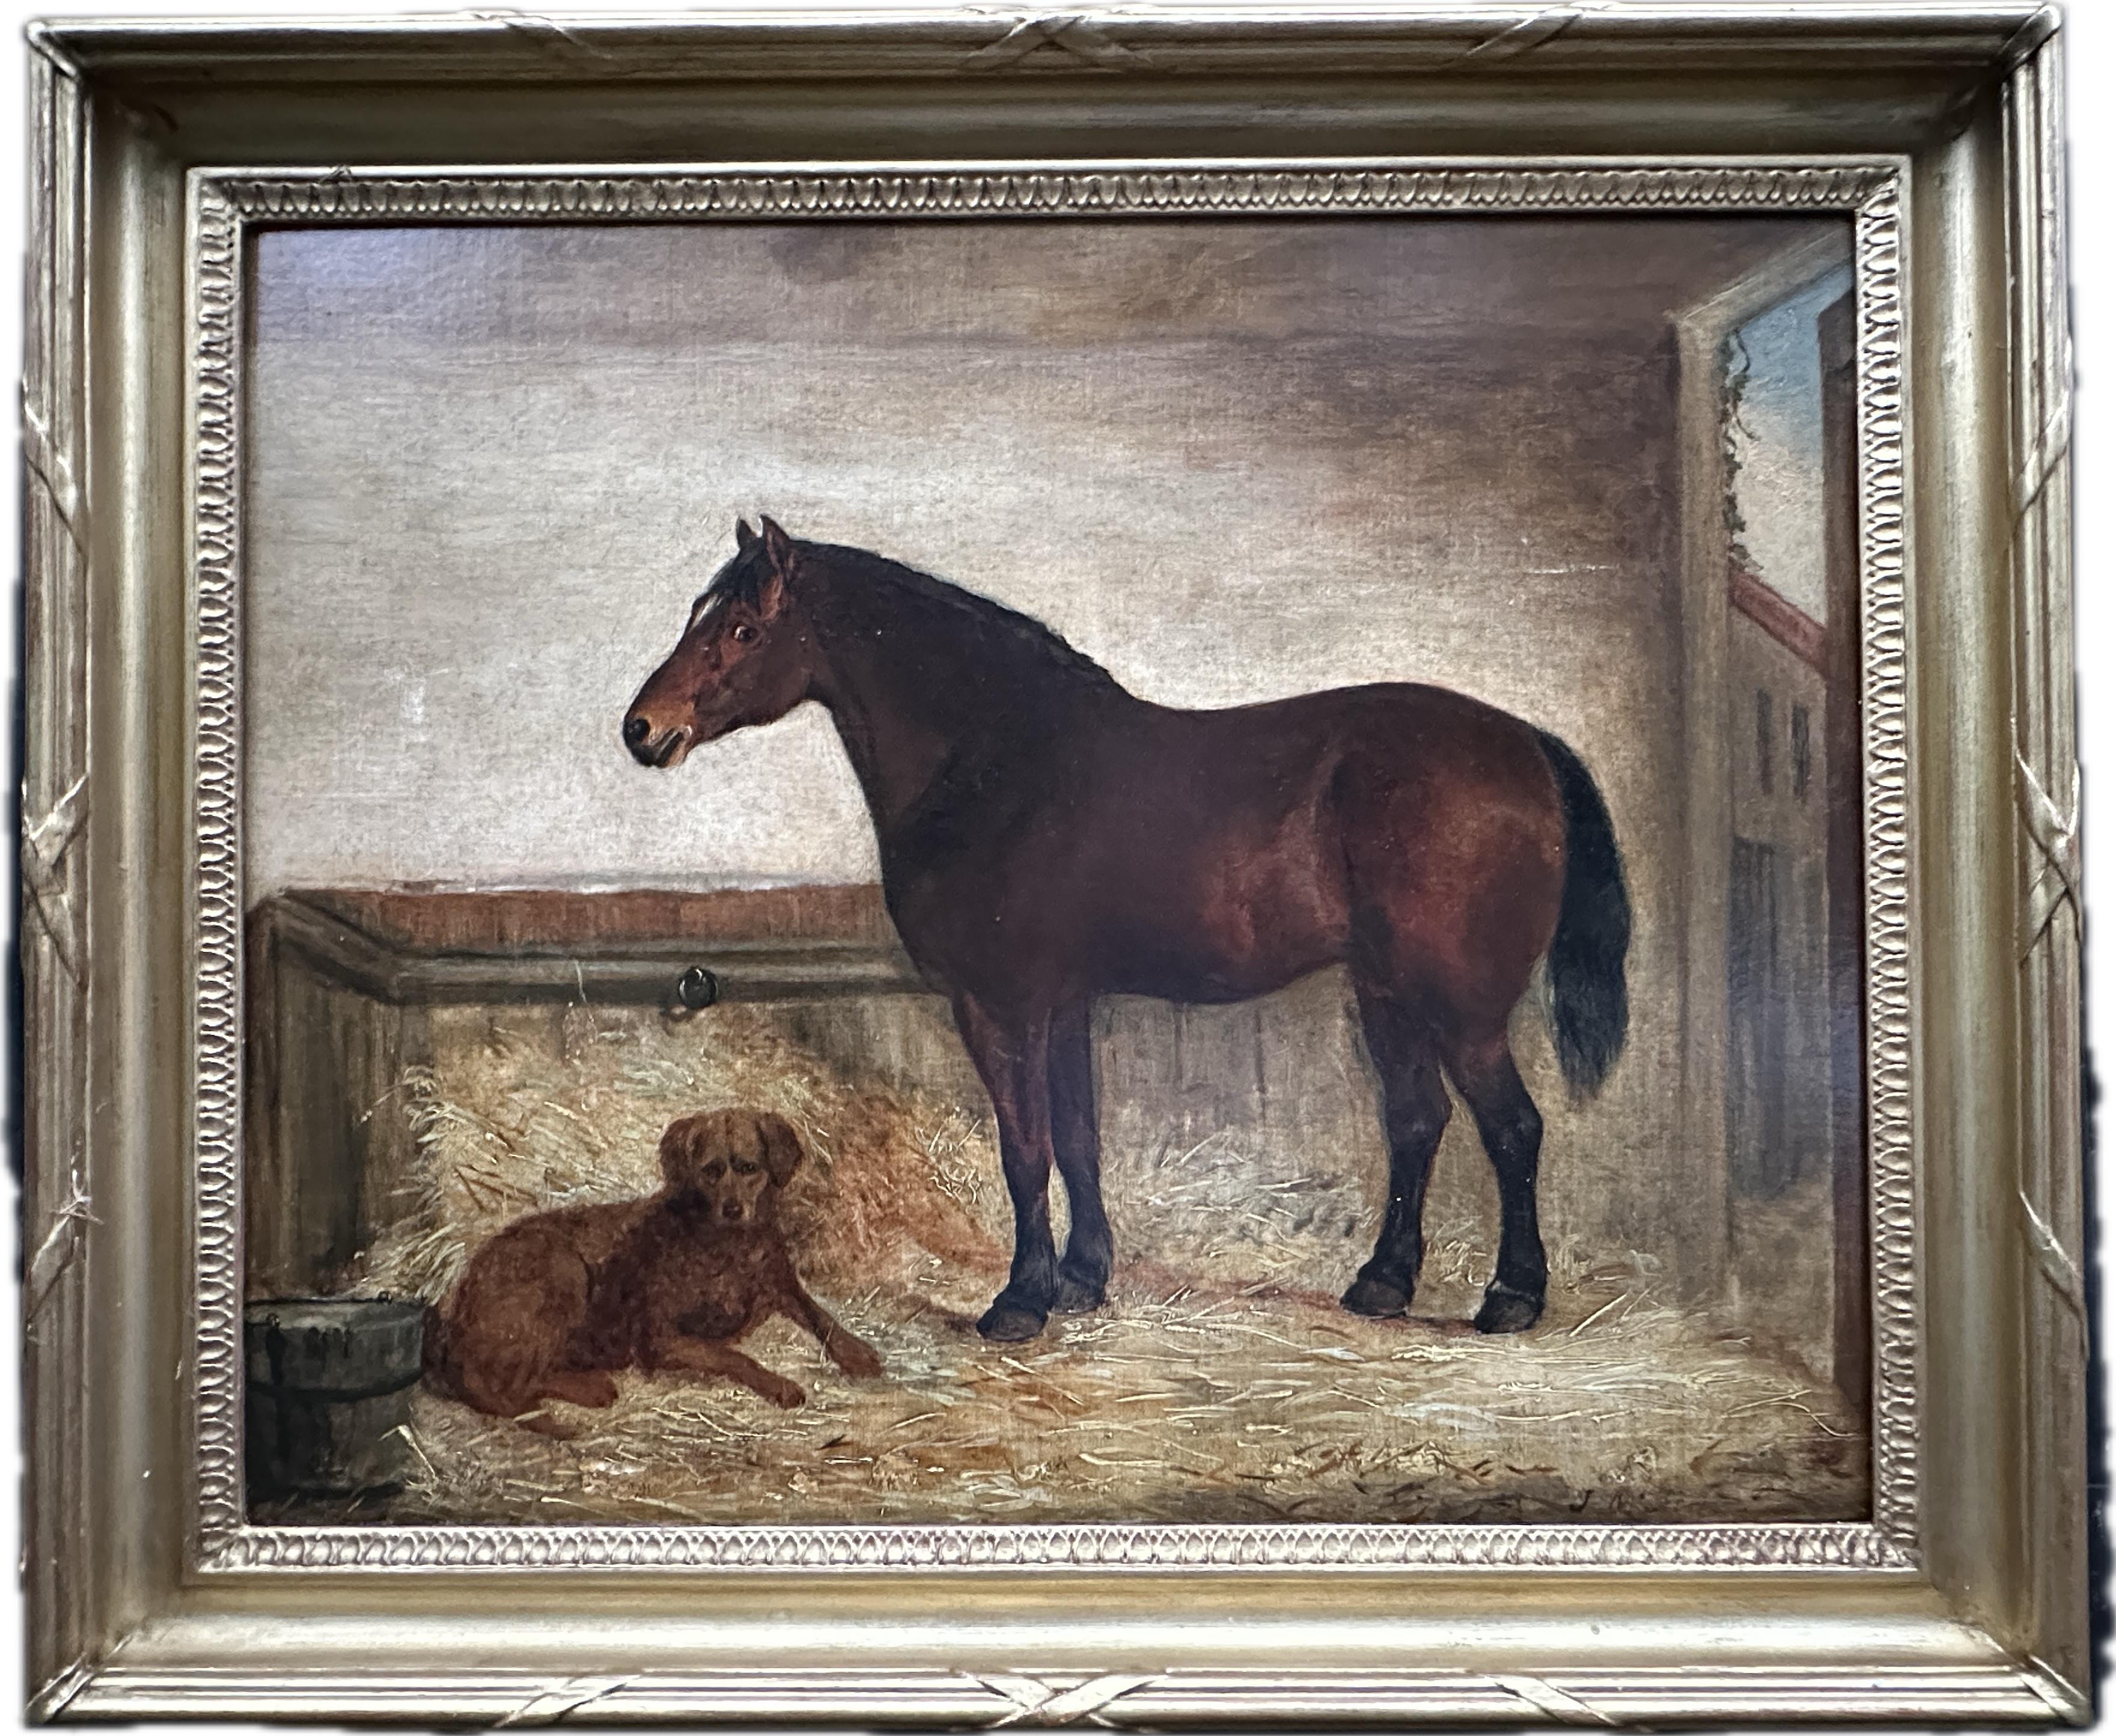 19th century English portrait of a horse and setter dog in a stable